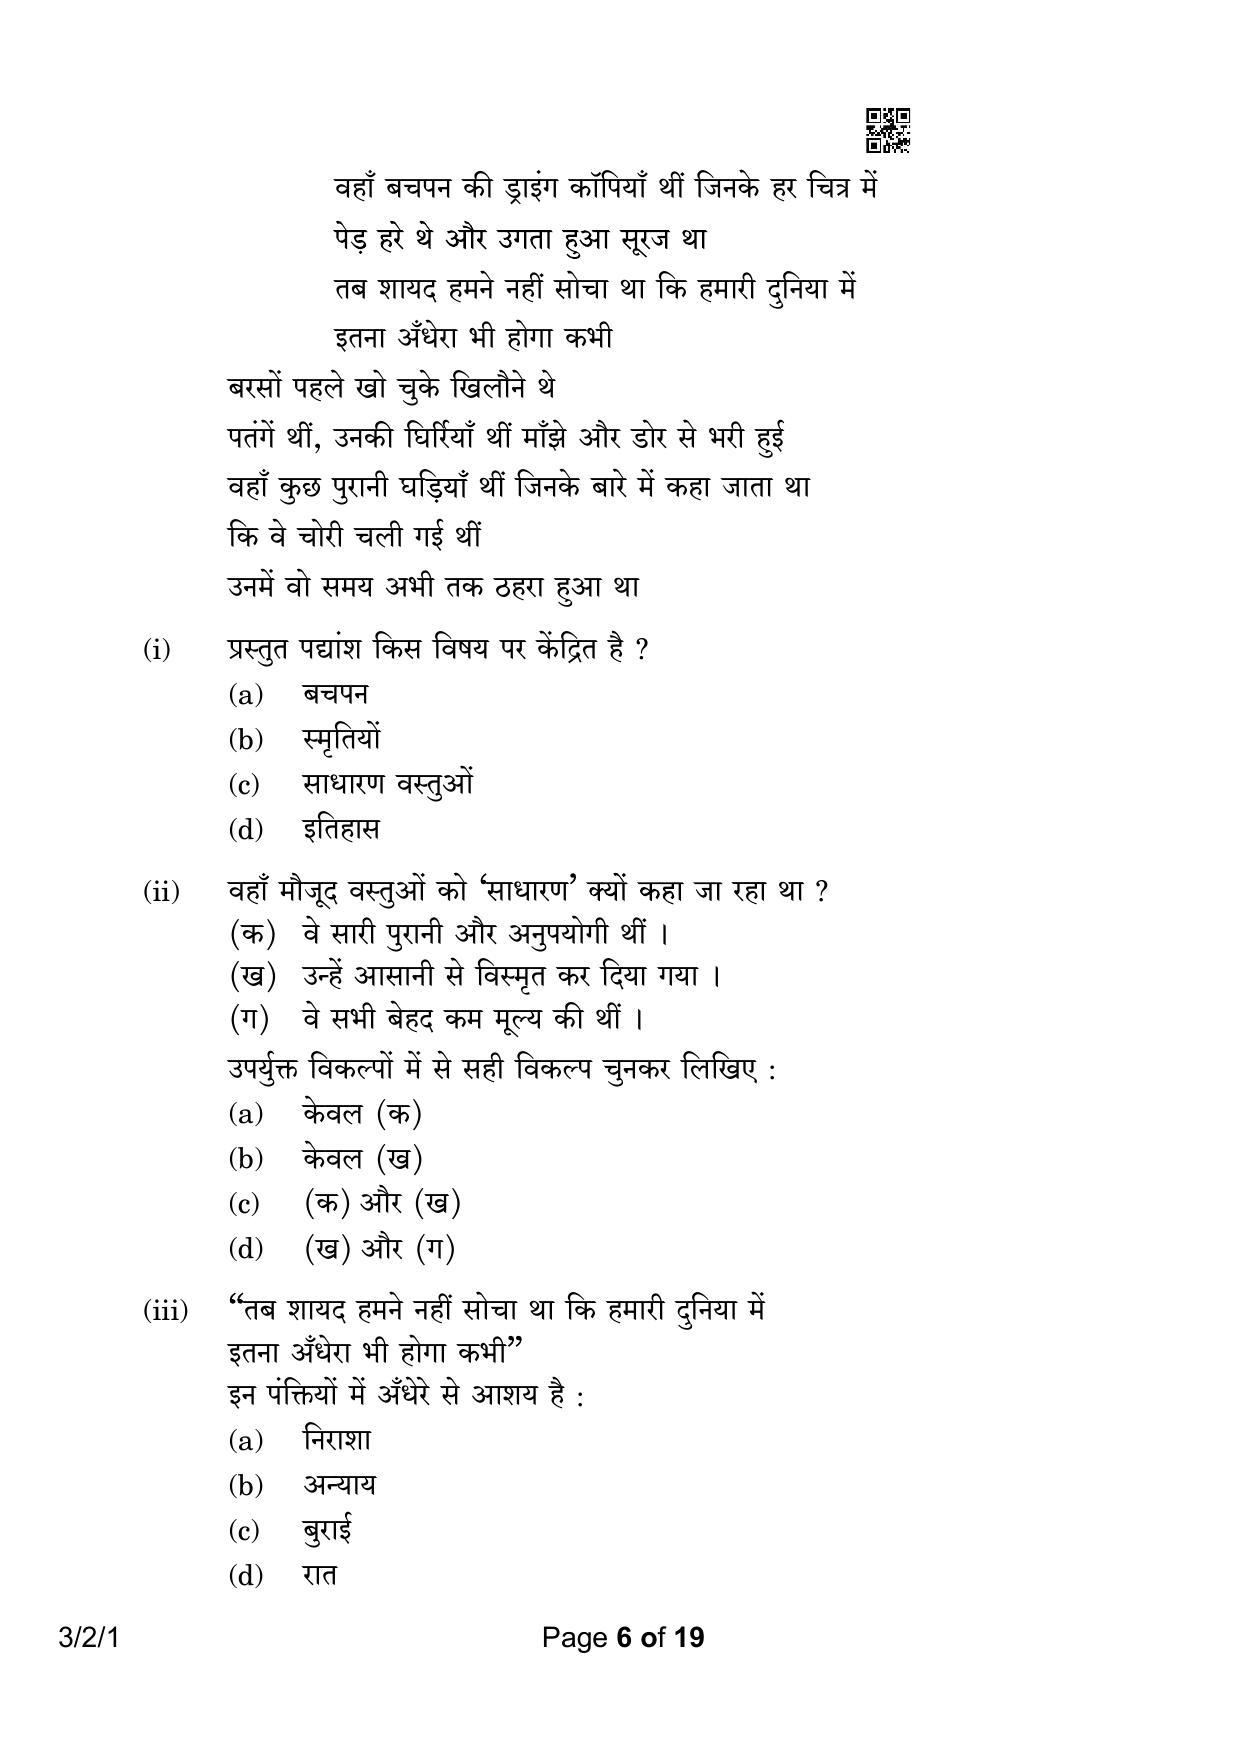 CBSE Class 10 3-2-1 Hindi A 2023 Question Paper - Page 6